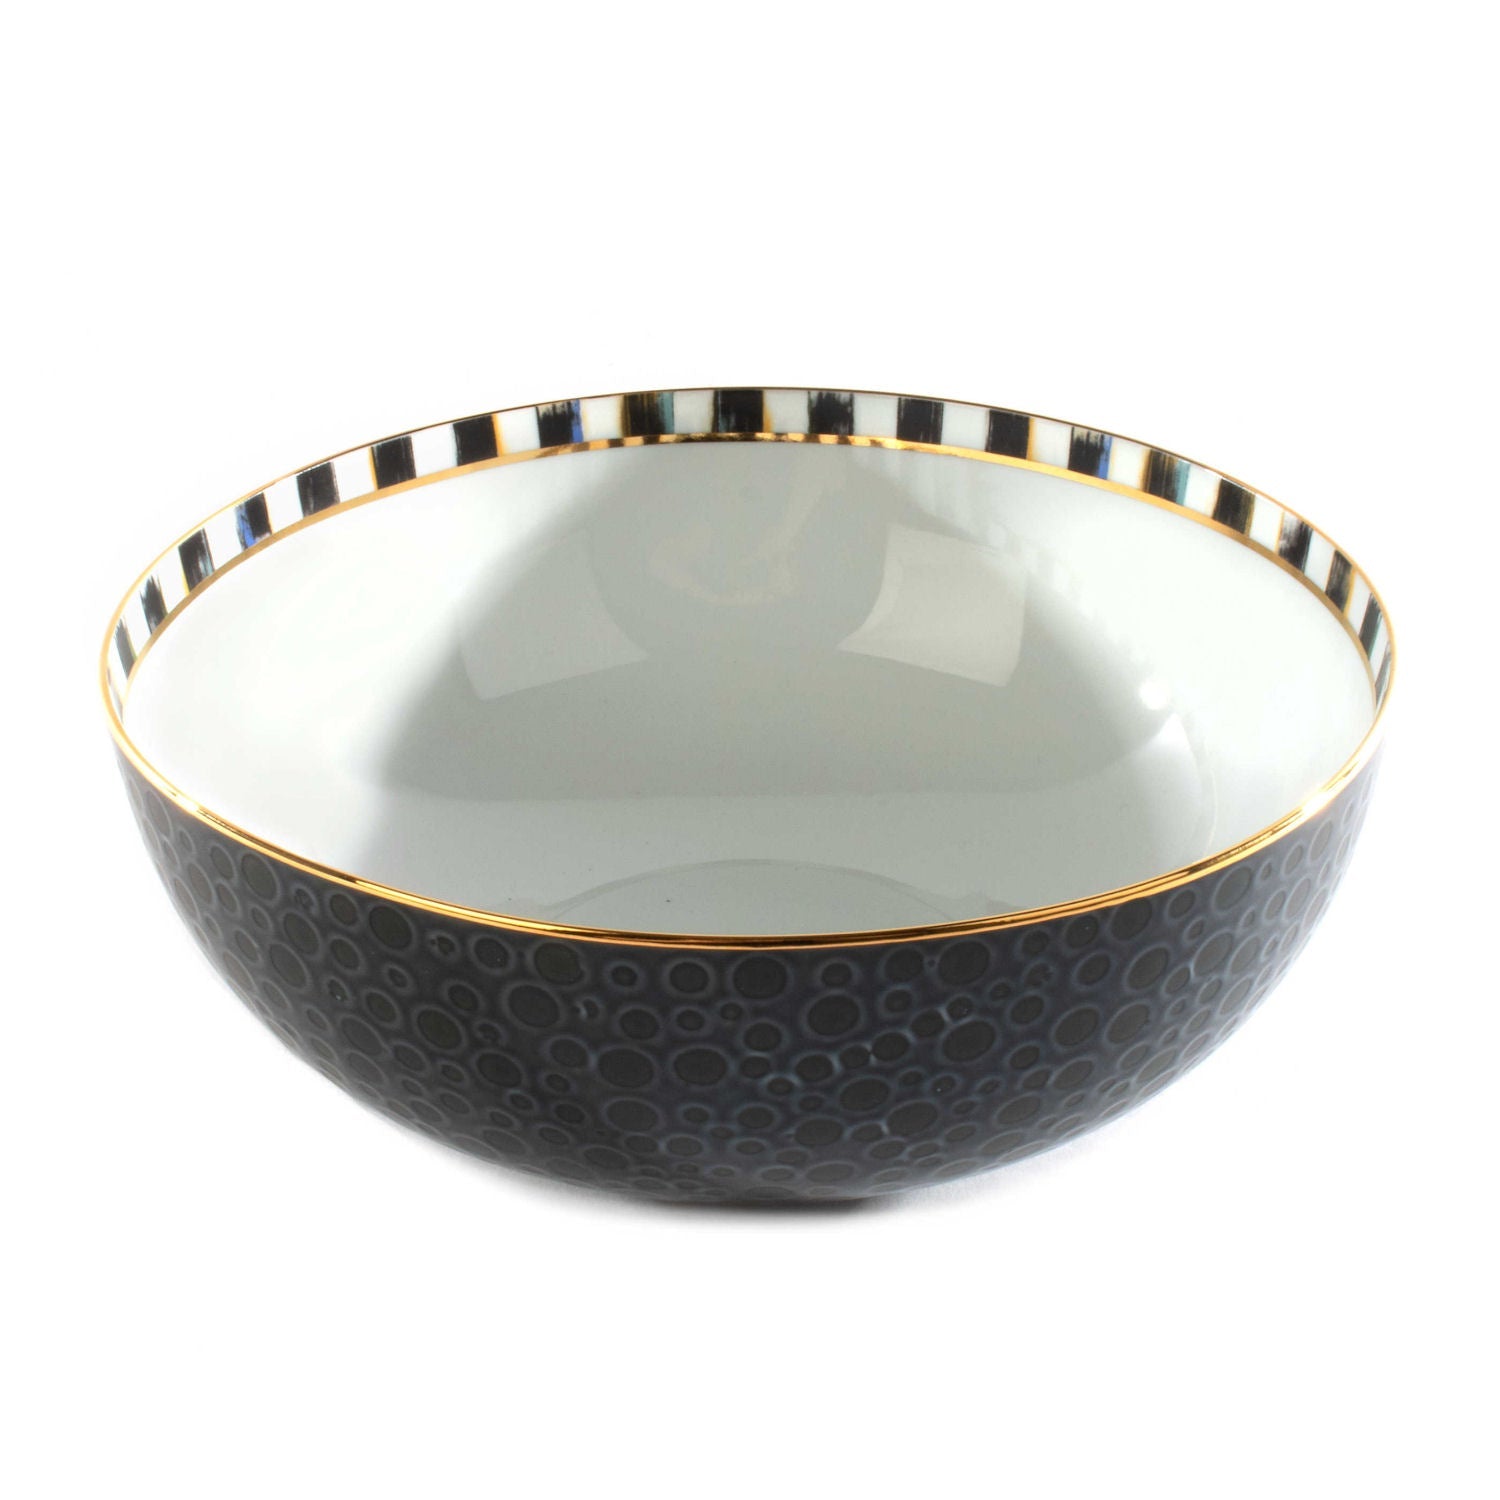 Luxury SoHo Serving Bowl by Mackenzie-Childs - Midnight - |VESIMI Design| Luxury and Rustic bathrooms online